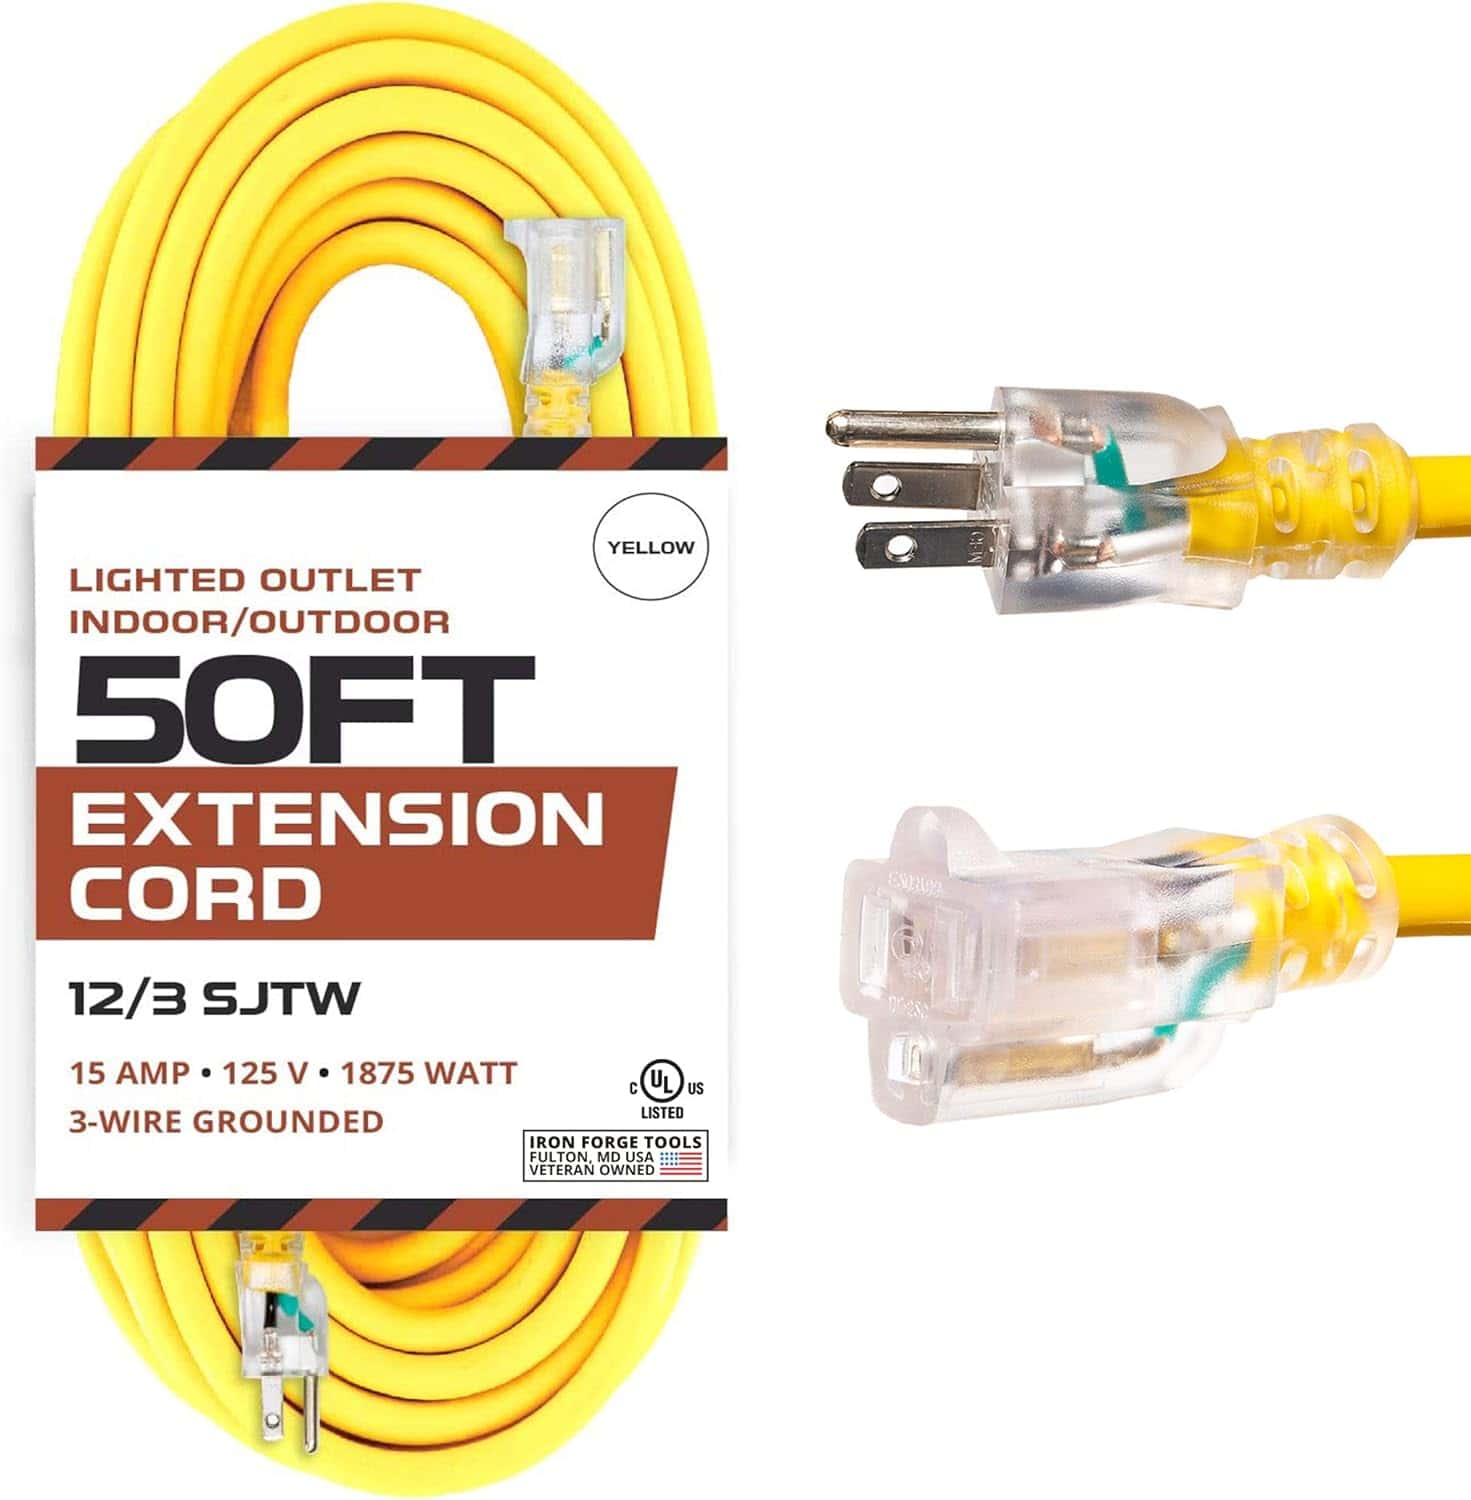 Iron-Forge-Outdoor-Lighted-Extension-Cord-50-Ft-12-3-SJTW-Heavy-Duty-15-AMP-Yellow-Extension-Cable-with-3-Prong-Grounded-Safety-Plug-12-Gauge-Extension-Cord-for-Garden-Major-Electric-Appliances